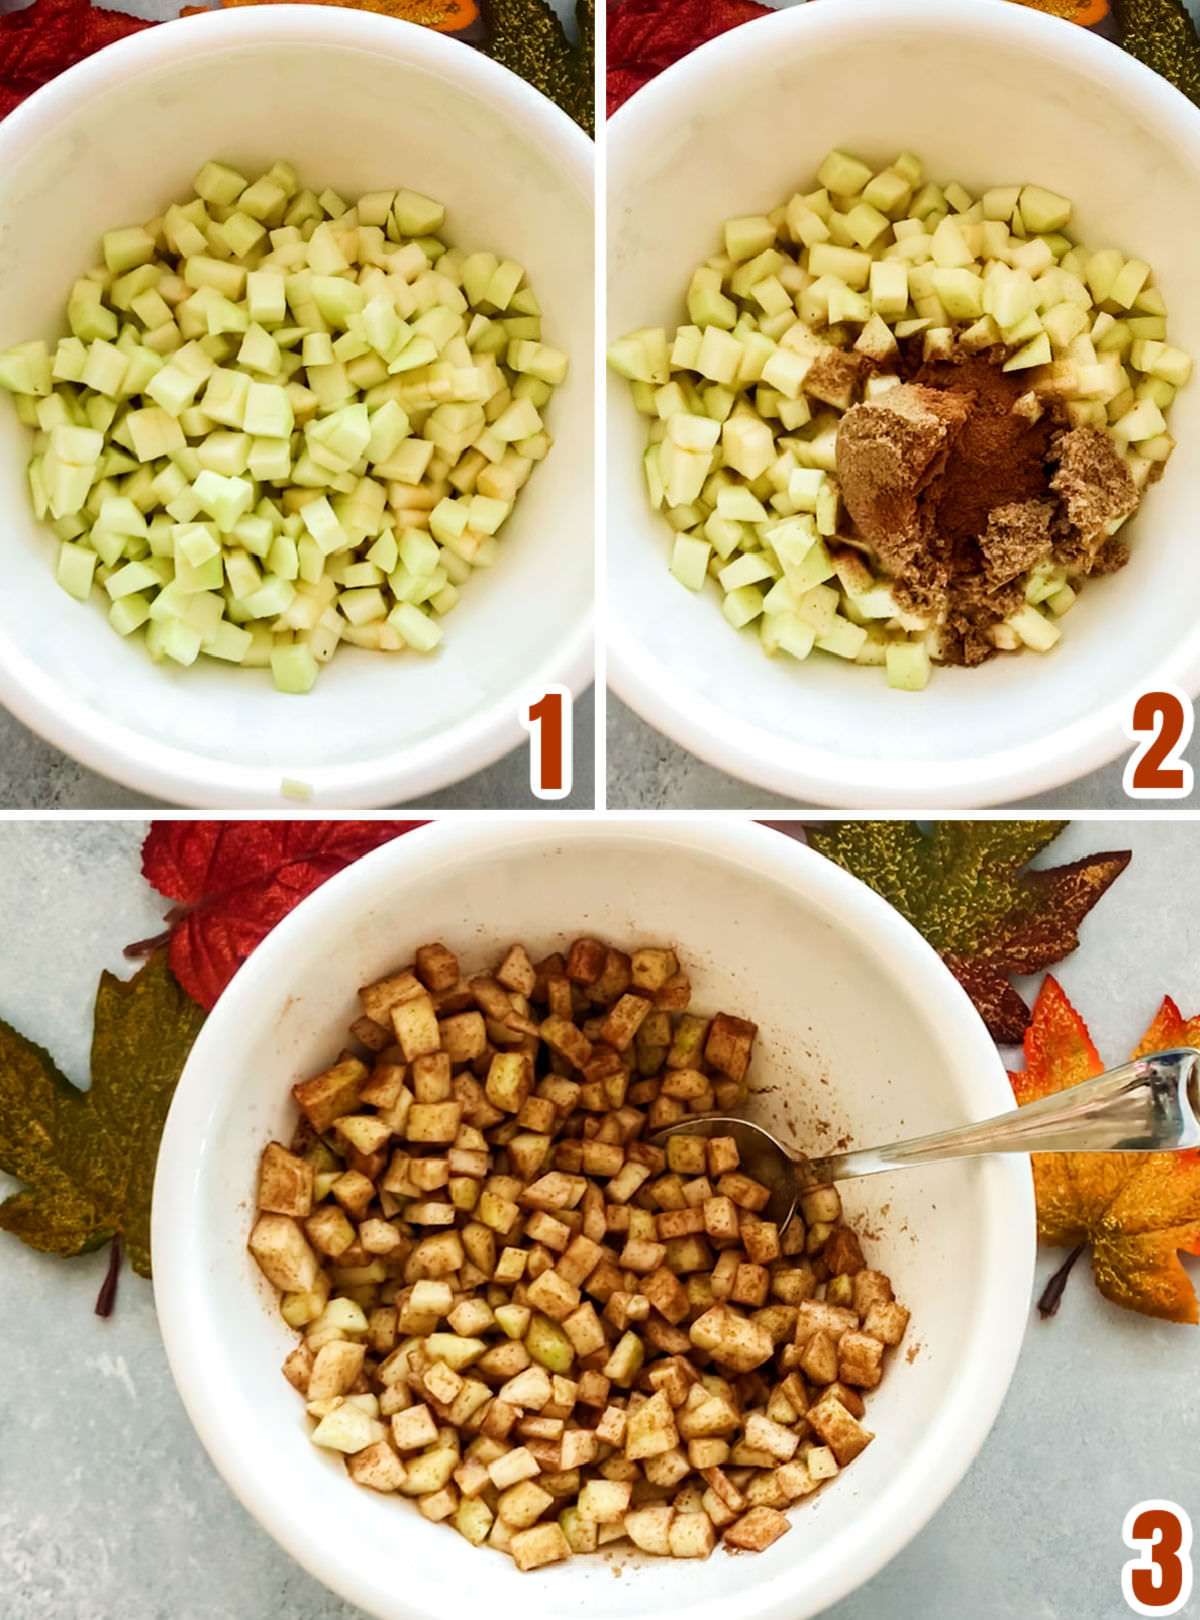 Collage image showing the steps for preparing the apples for the cinnamon rolls.